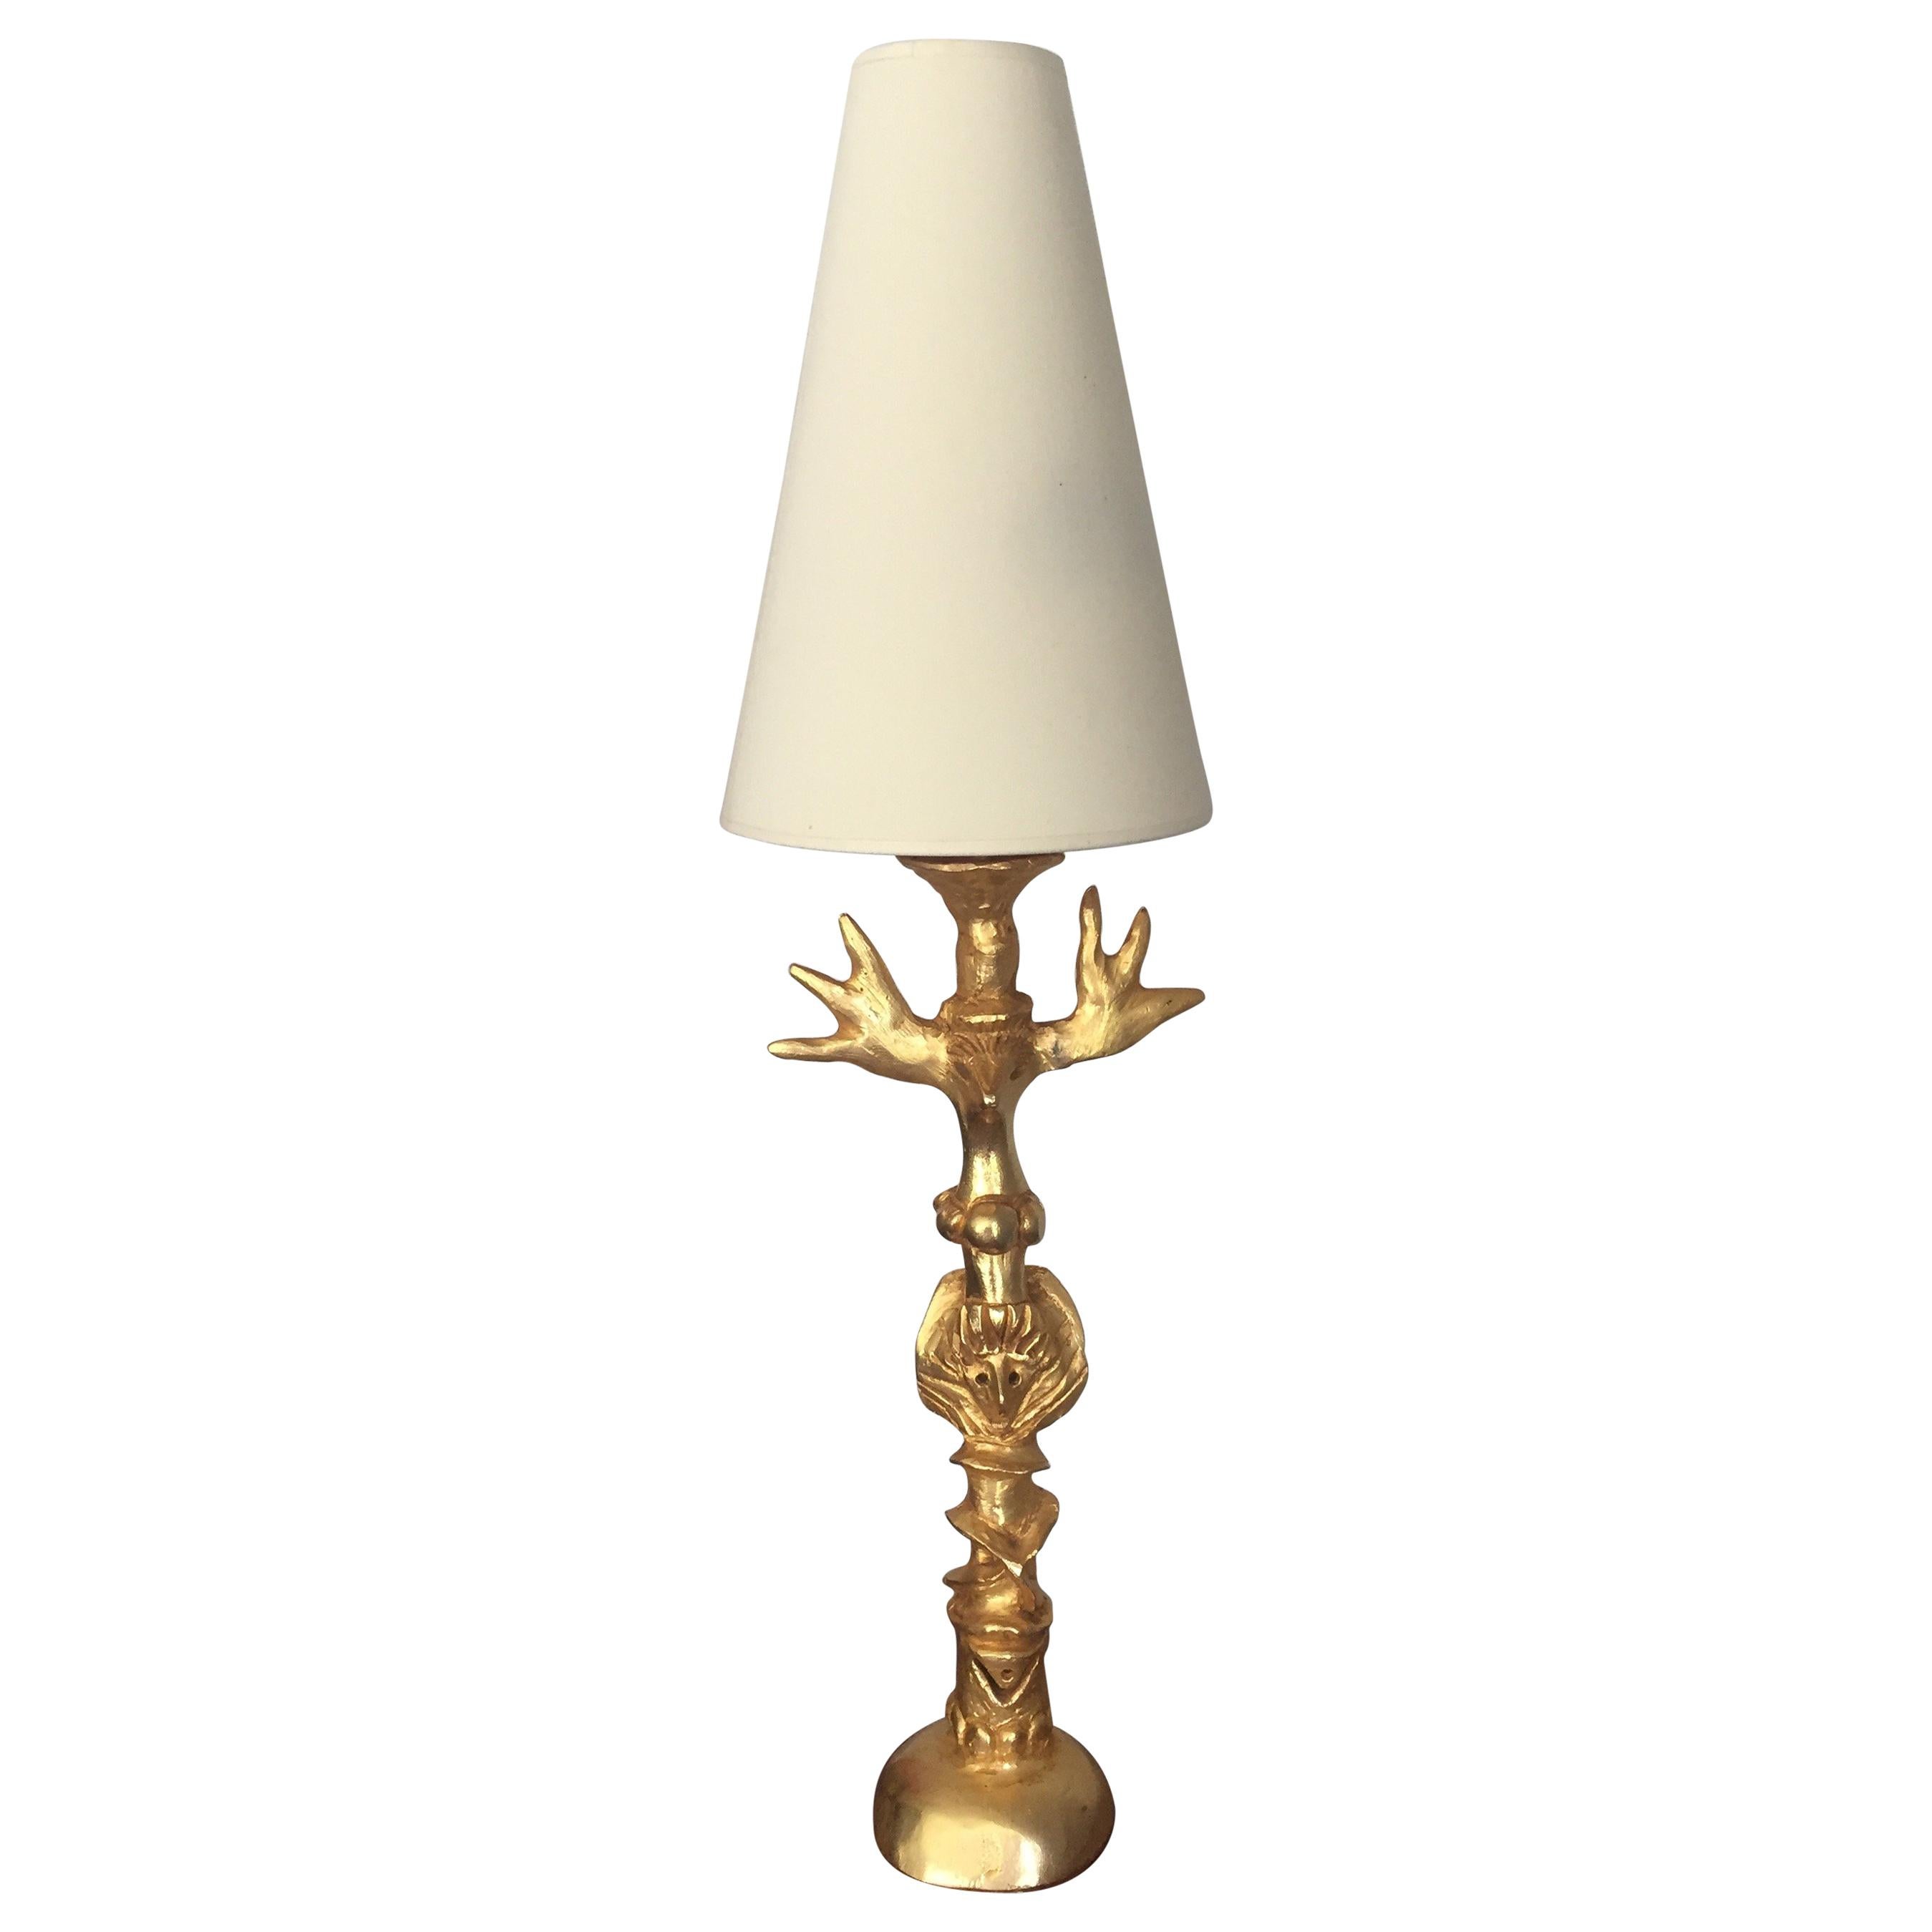 Gilded Bronze Table Lamp by Pierre Casenove for Fondica, 1980s